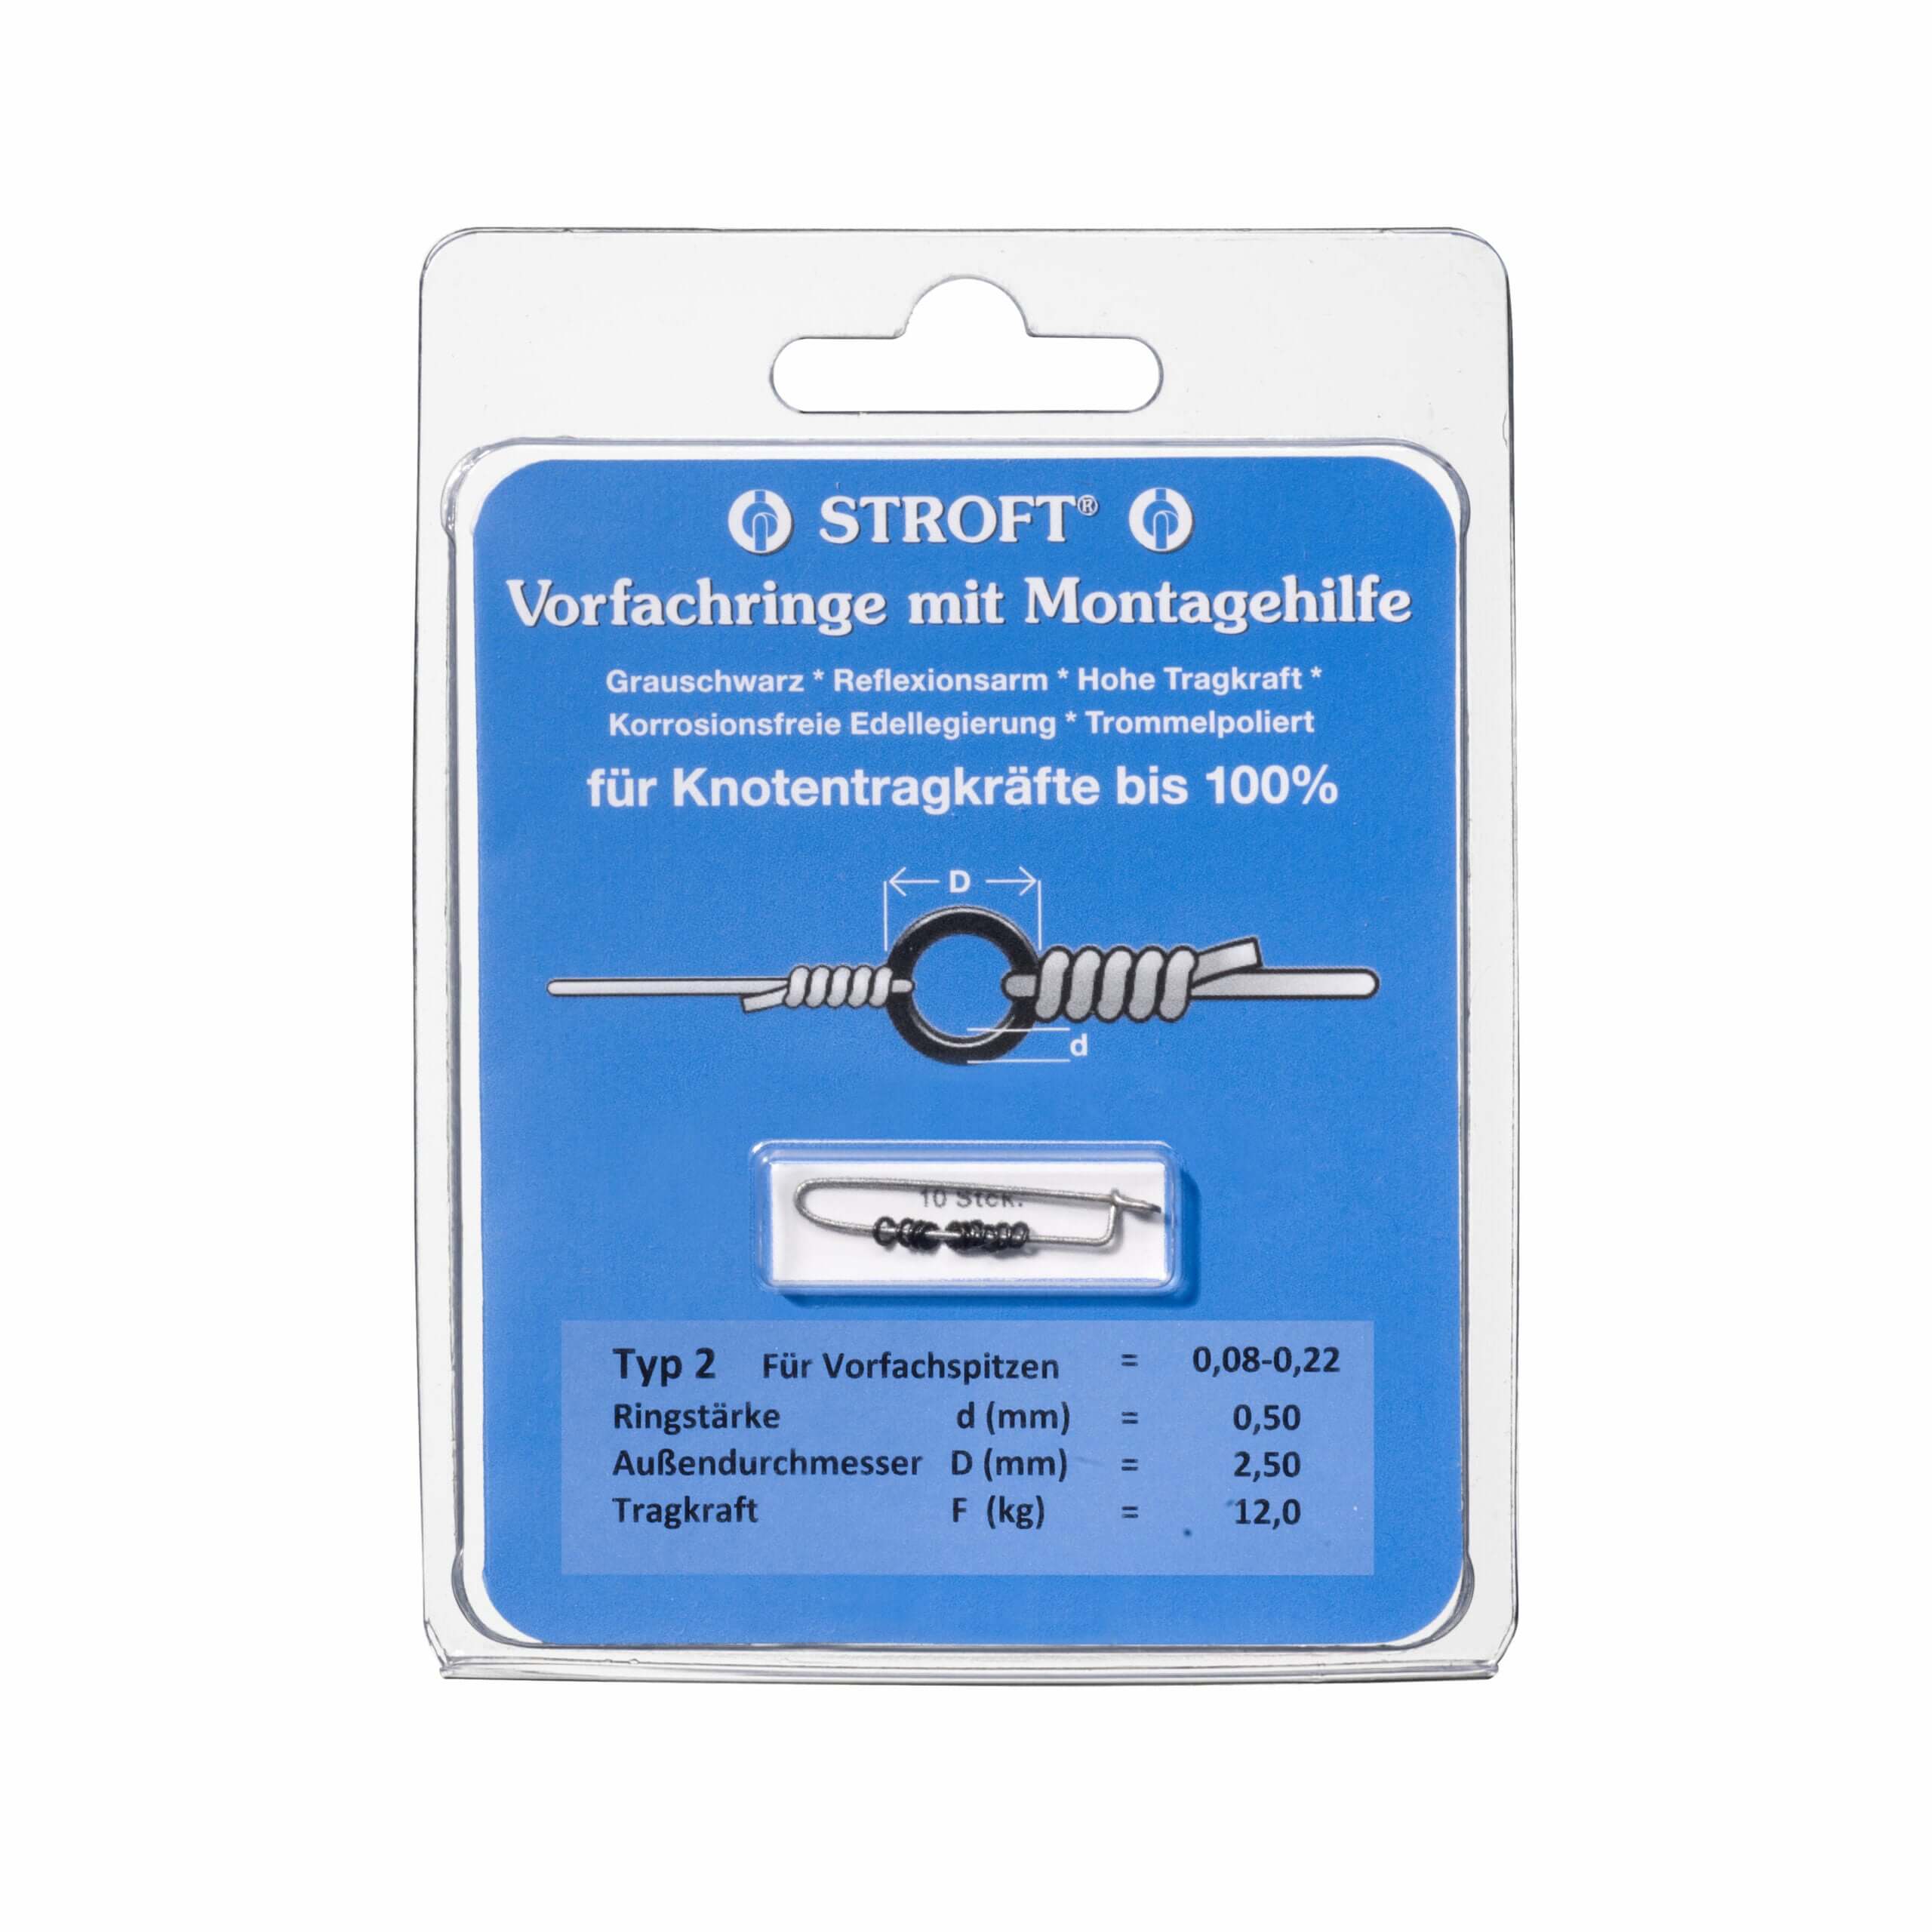 Tippet Stroft Rigrings